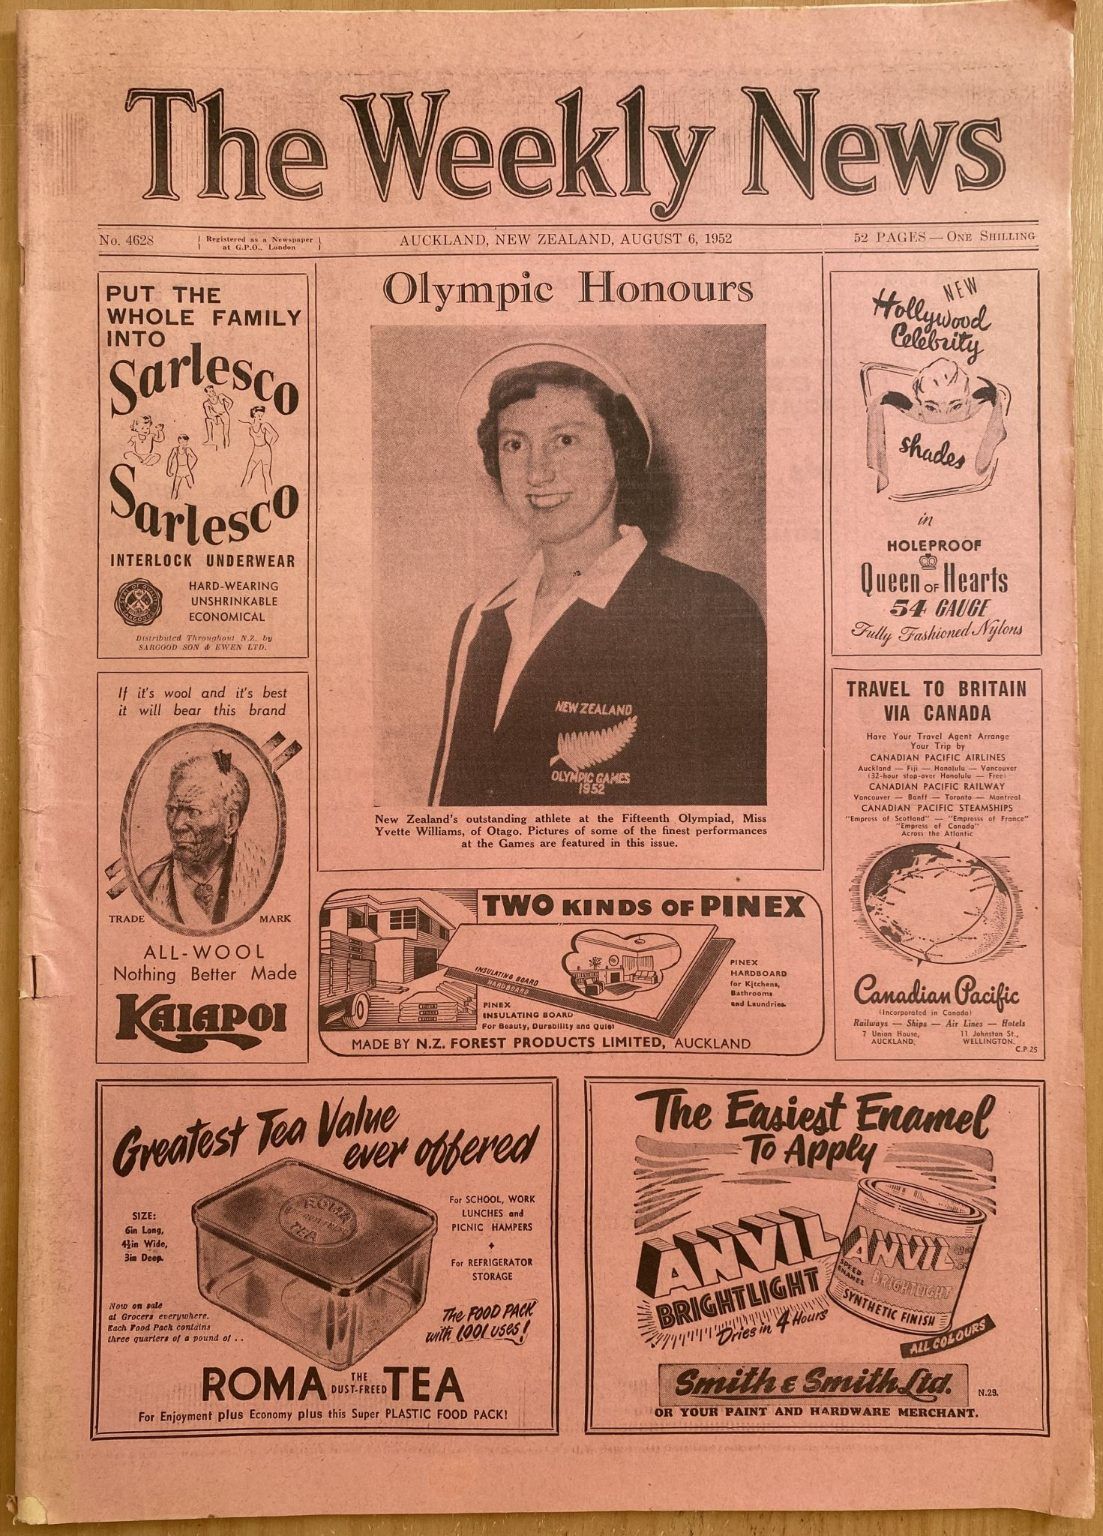 OLD NEWSPAPER: The Weekly News - No. 4628, 6 August 1952